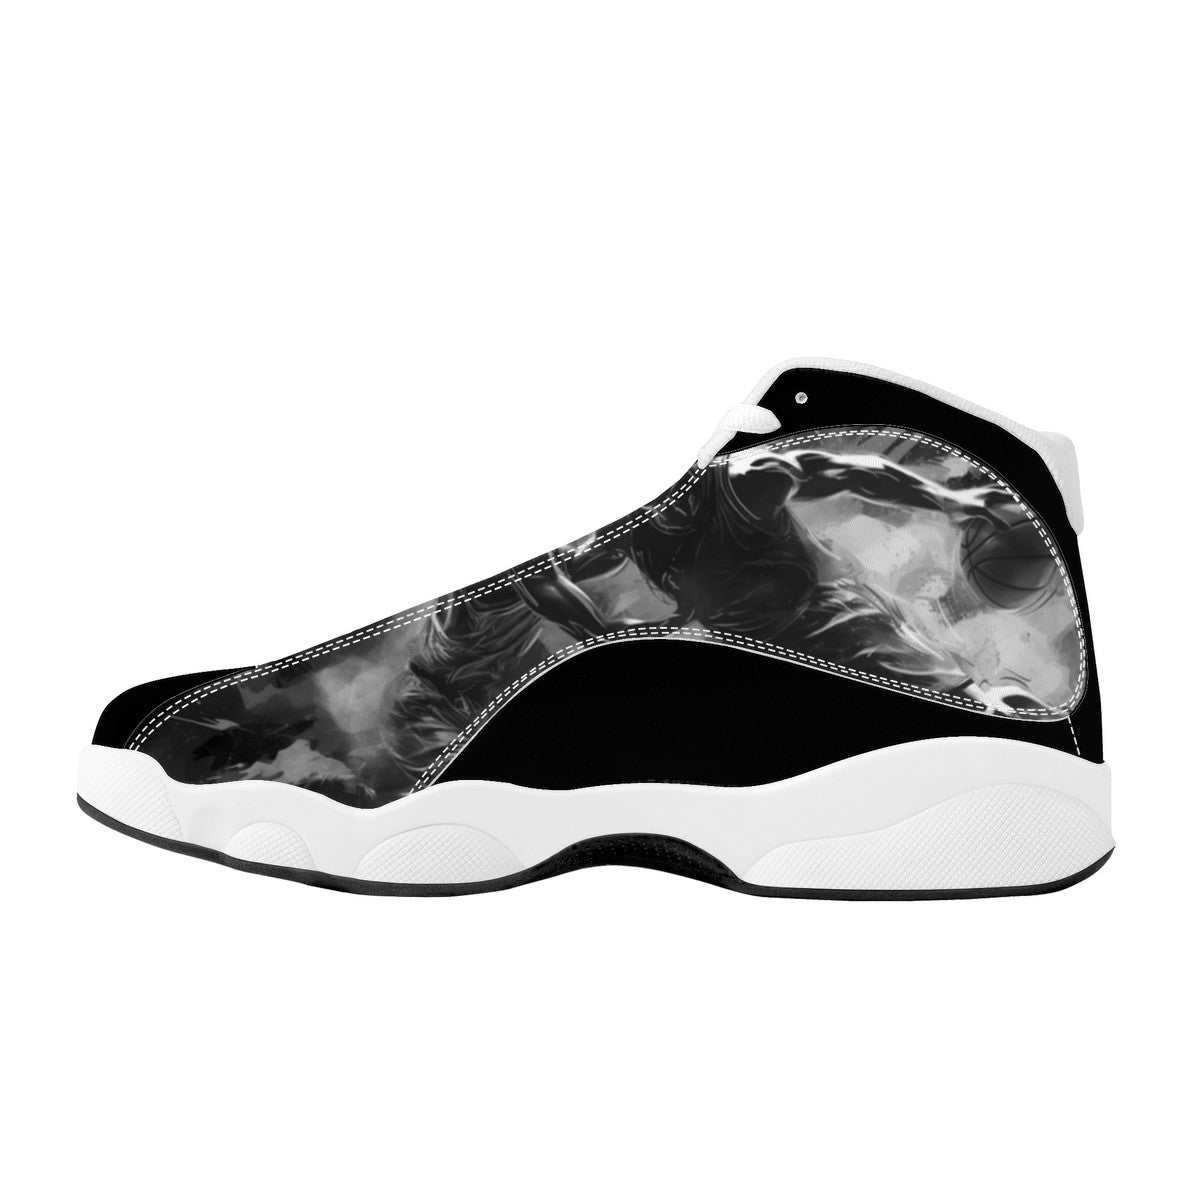 RVT Basketball Shoes - In the Game black/grey